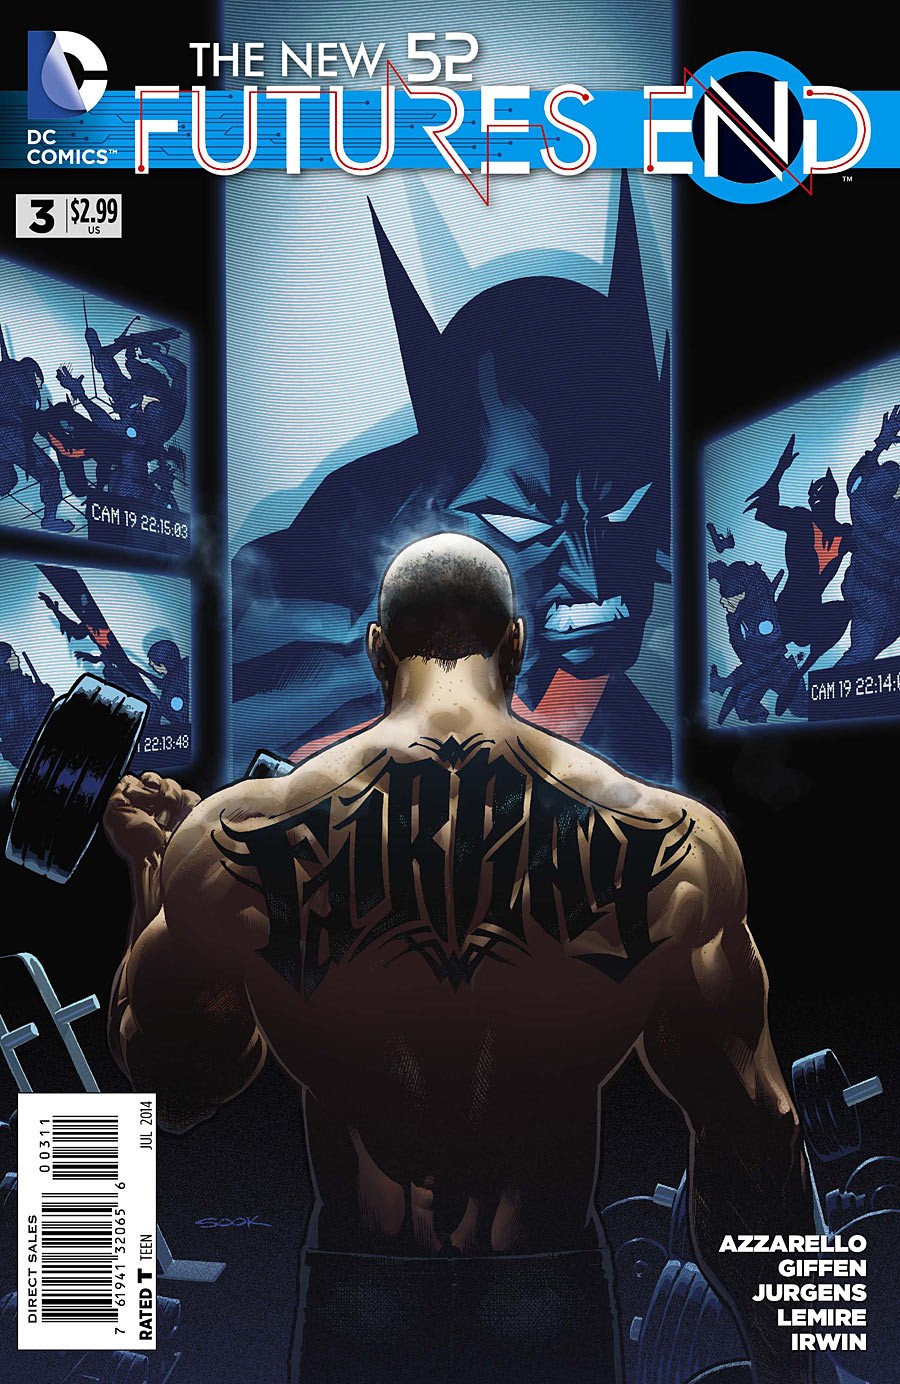 The New 52: Futures End Vol. 1 #3